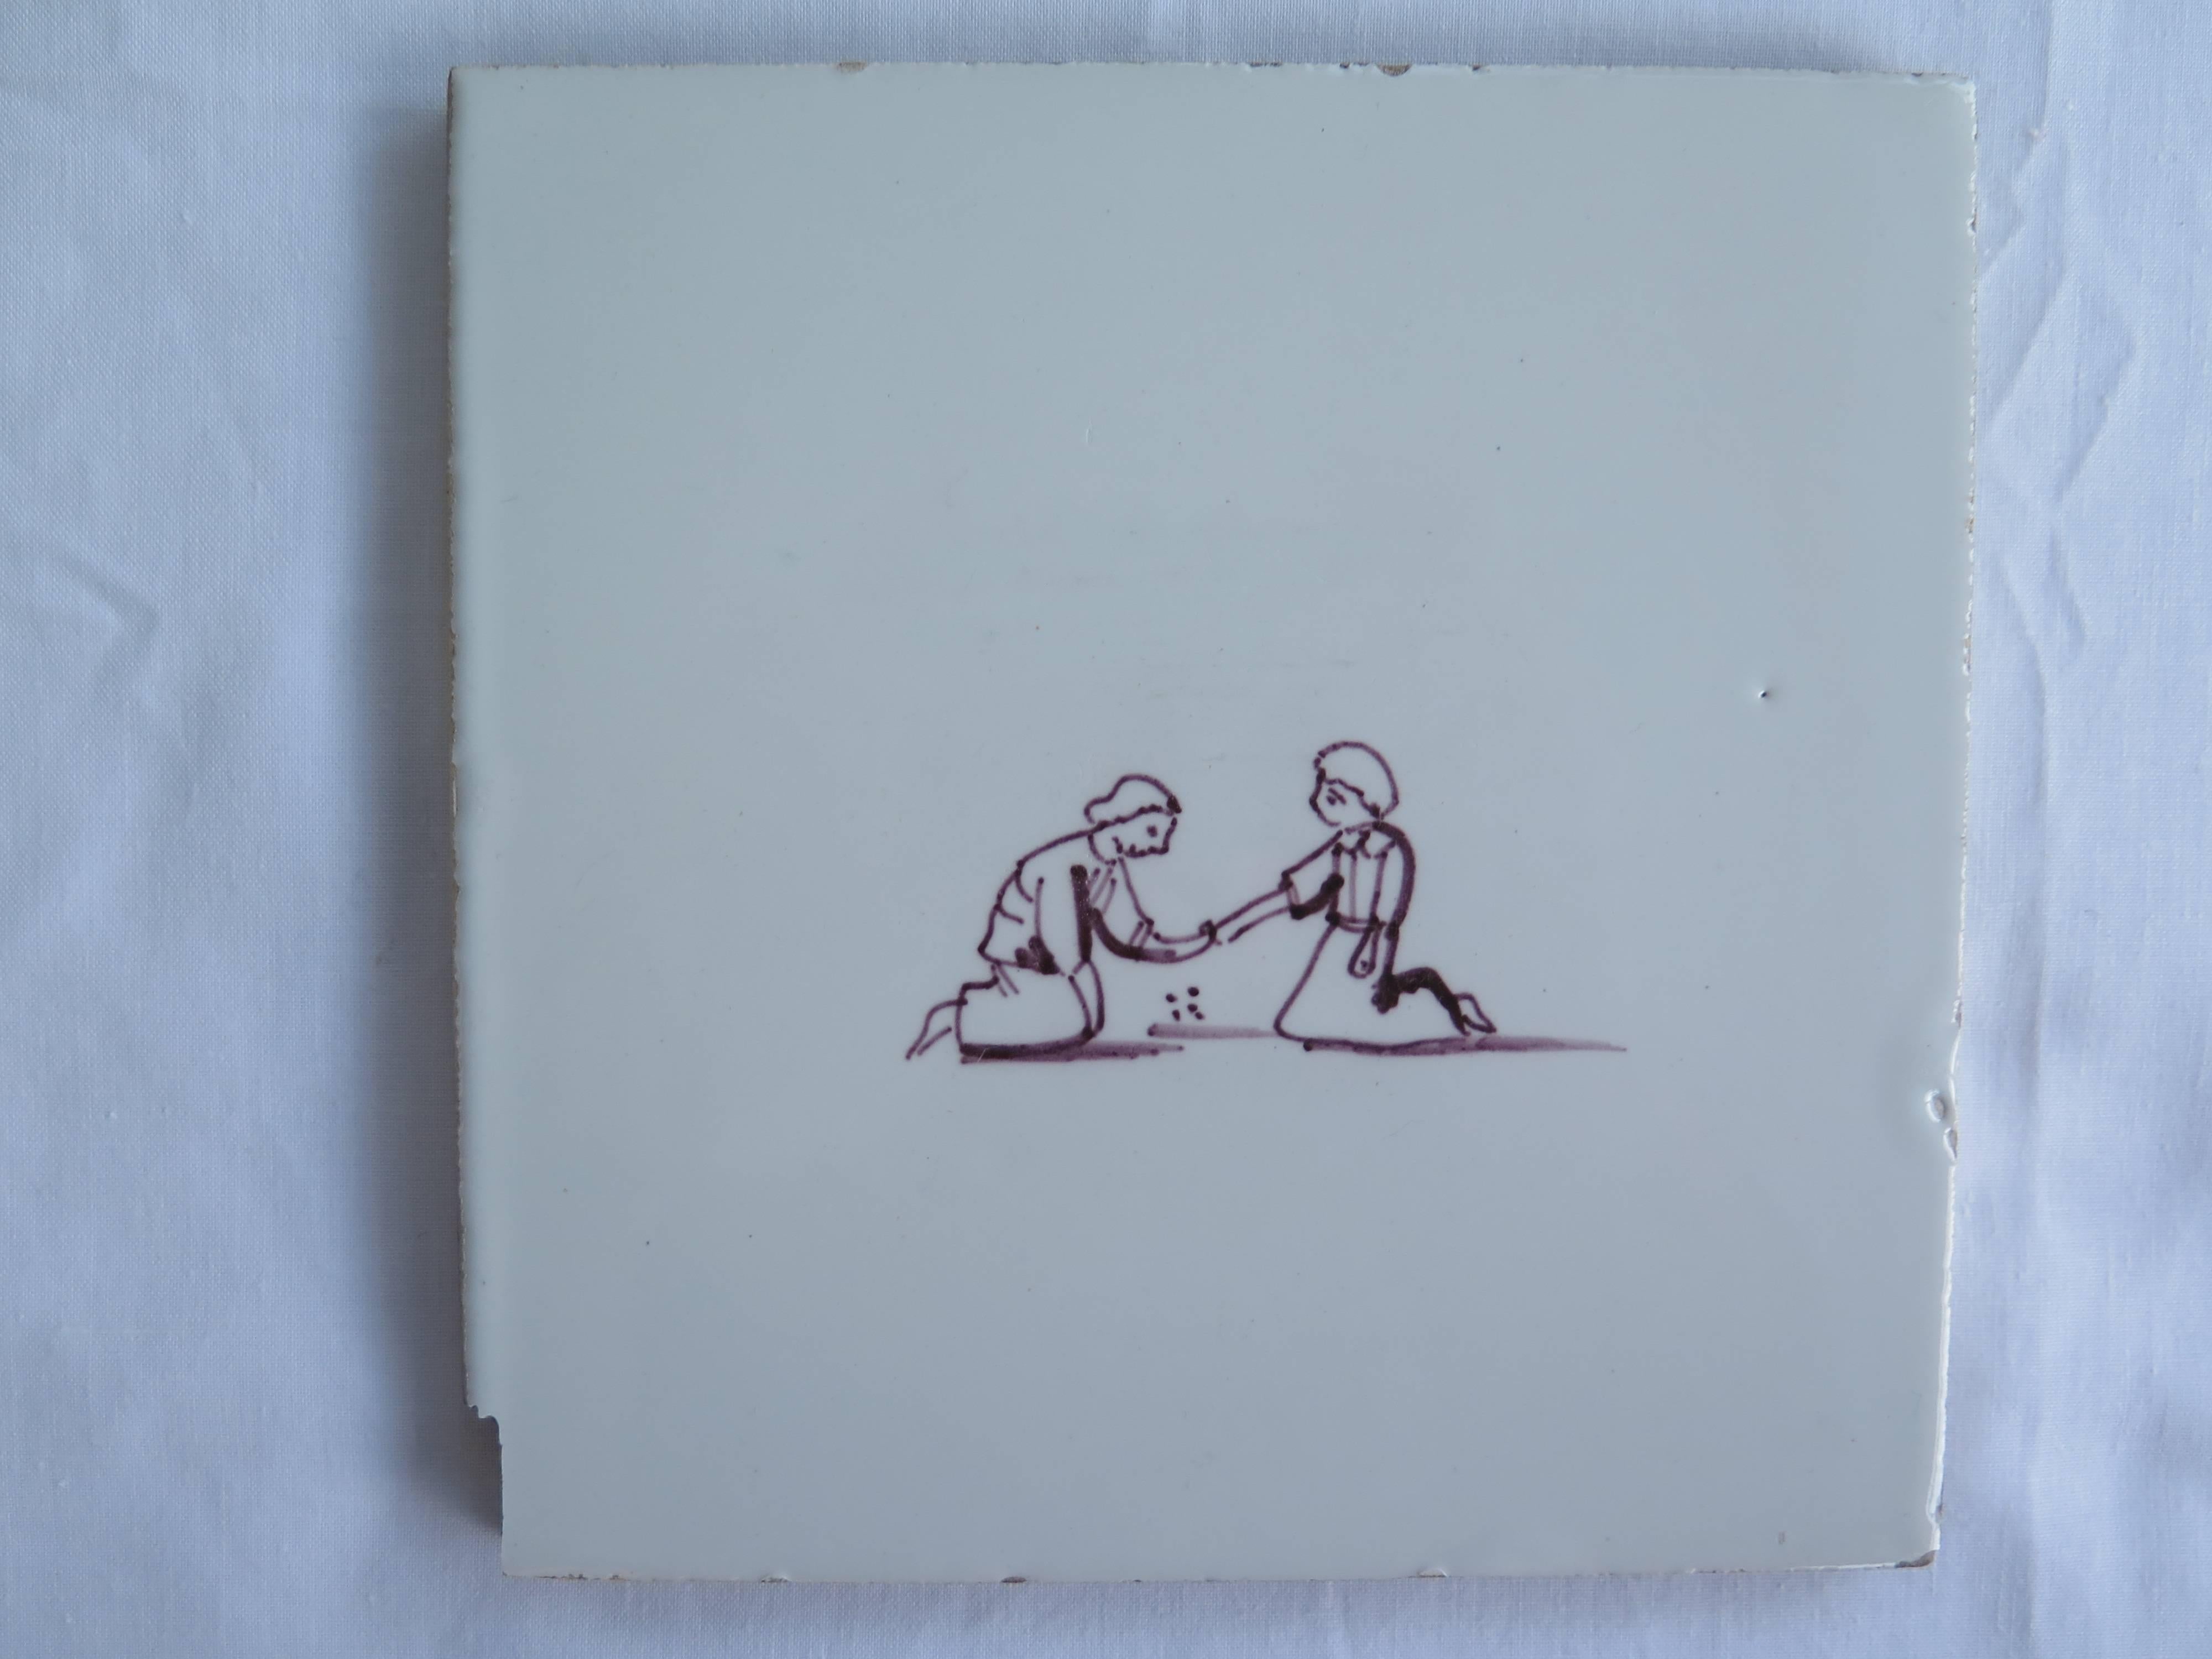 Earthenware Seven Delft Ceramic Manganese Wall Tiles Hand painted Children's Games